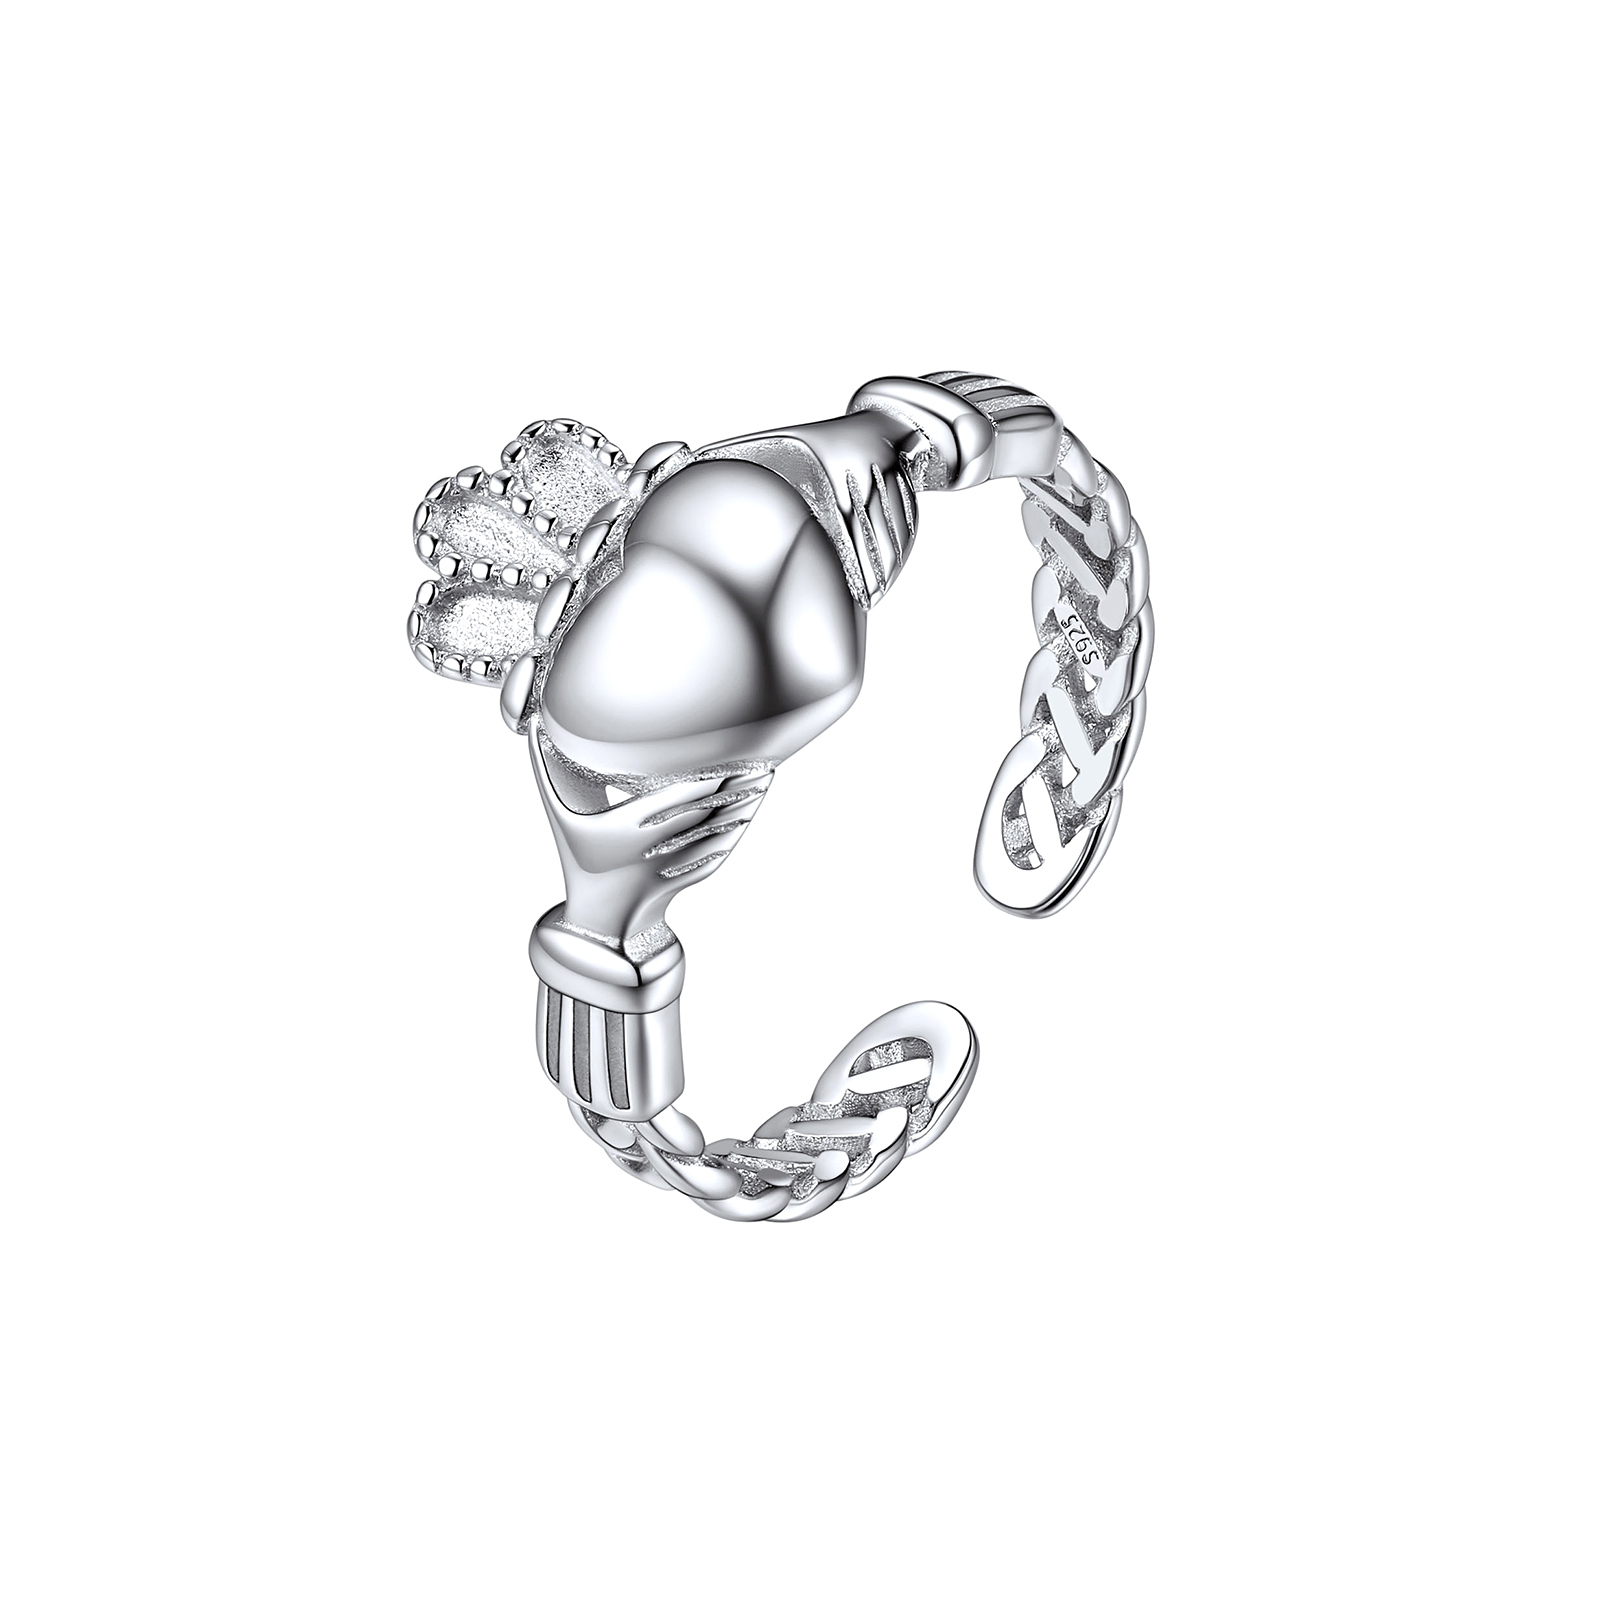 ChicSilver Sterling Silver Irish Claddagh Ring Celtic Knot Promise Ring For Women